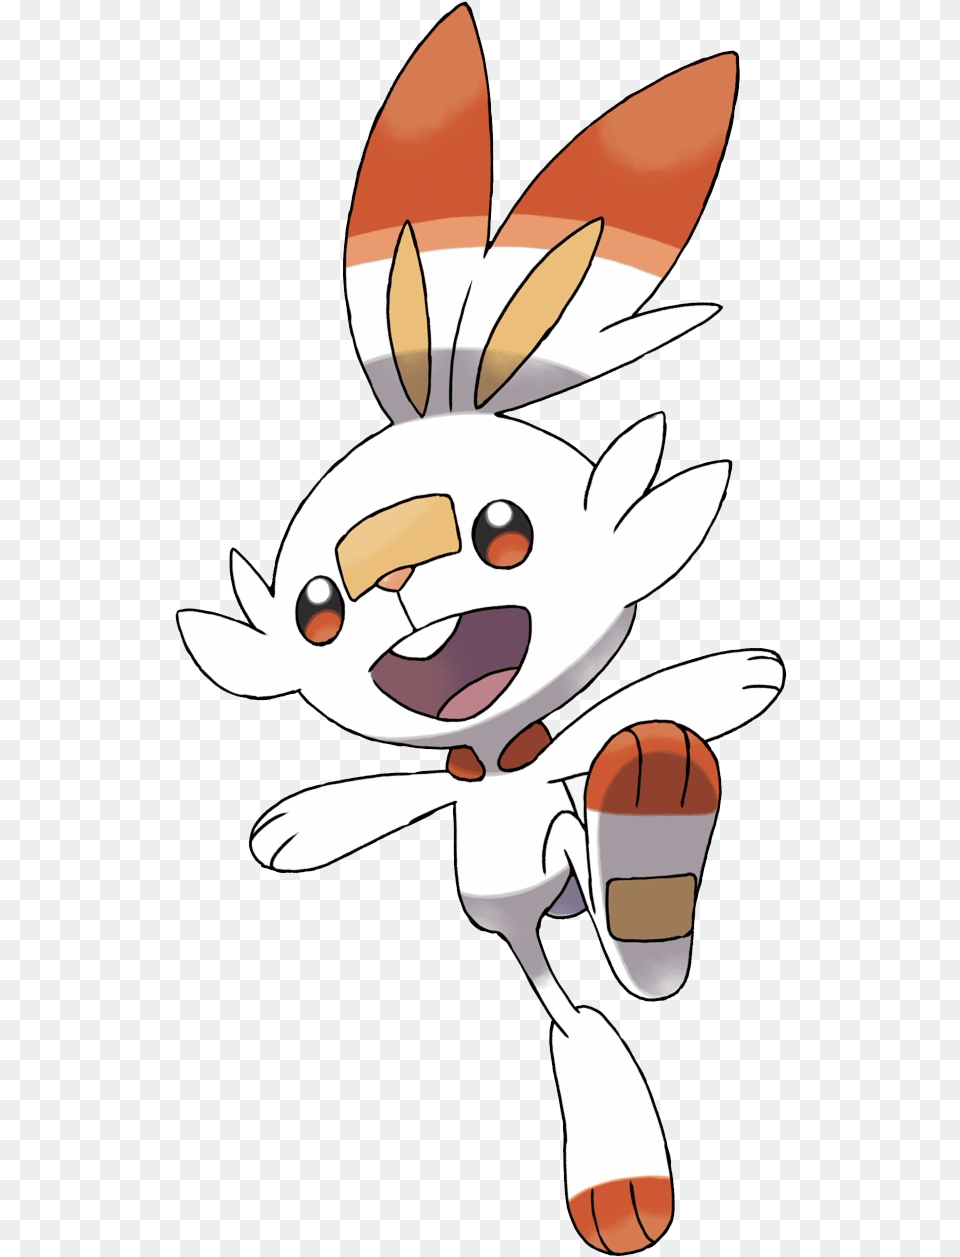 A Red And White Cartoon Bunny Creature Pokemon Scorbunny, Animal, Fish, Sea Life, Shark Free Png Download